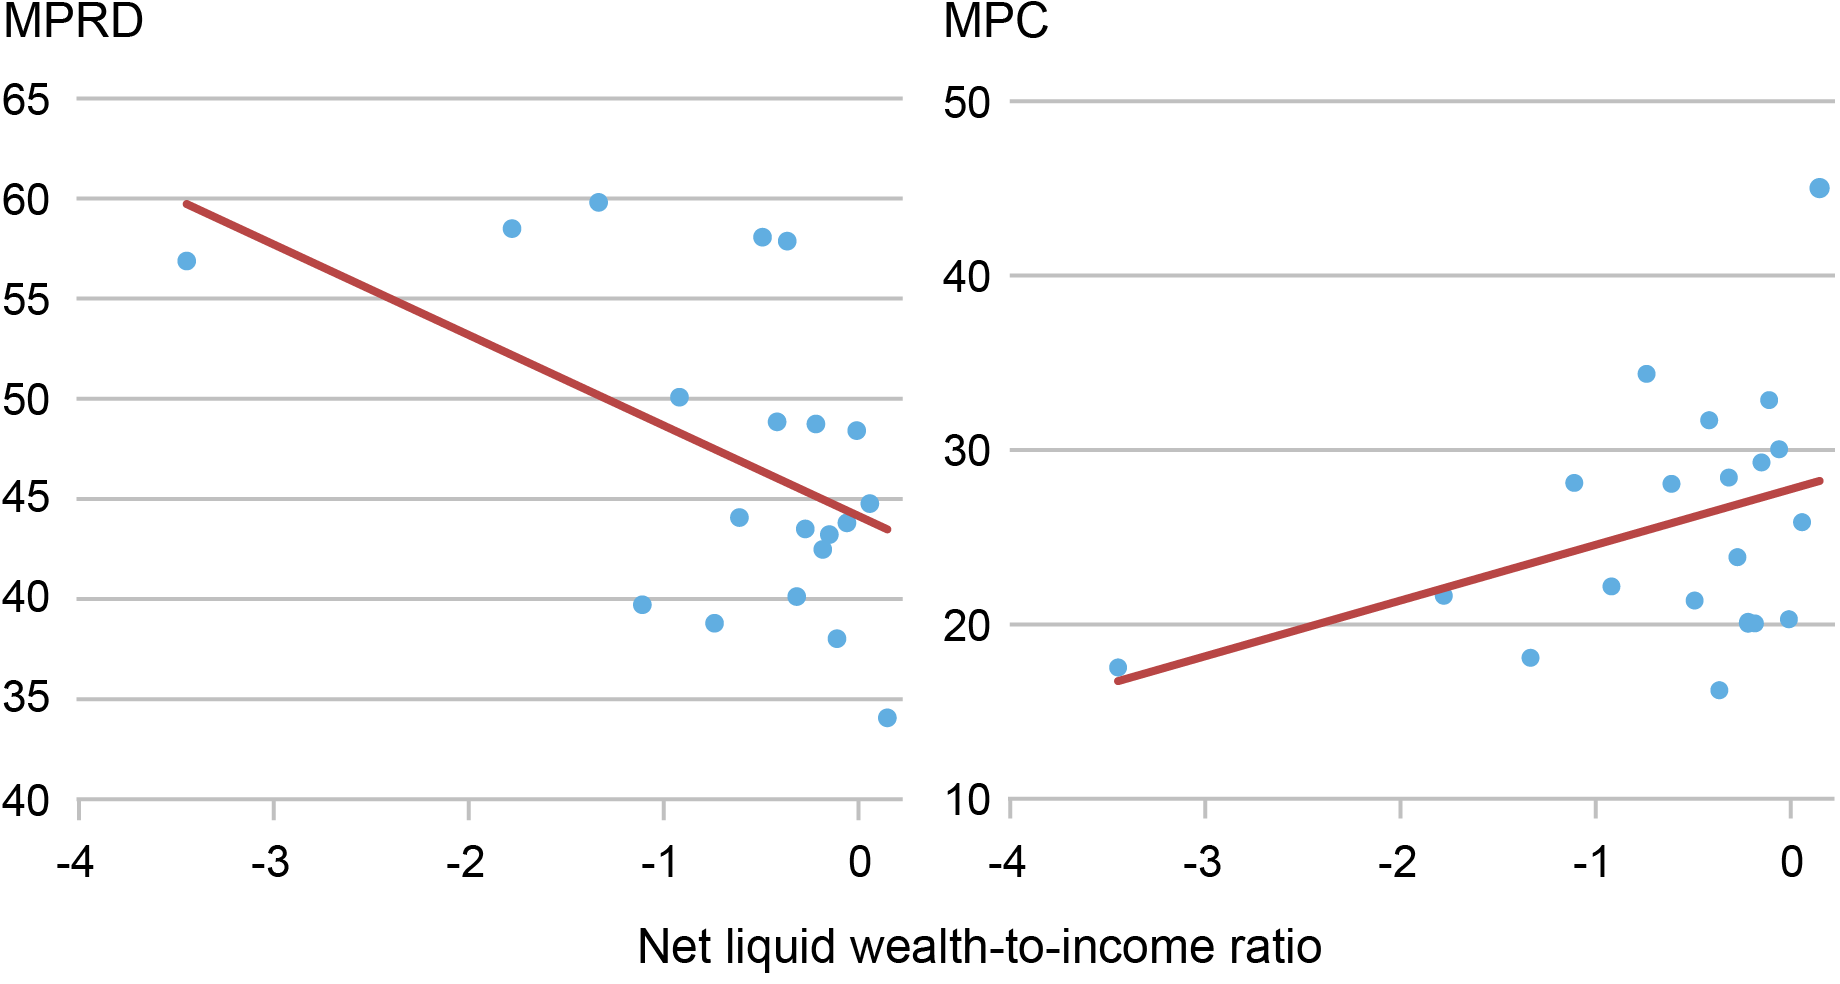 Two-panel scatter plot showing marginal propensity to repay debt (left panel) and marginal propensity to consume (right panel).  Households with a low net liquid assets-to-income ratio are more likely to pay off debt and adjust their net wealth positions, while households with a lower net liquid assets-to-income ratio have a lower marginal propensity to consume. 